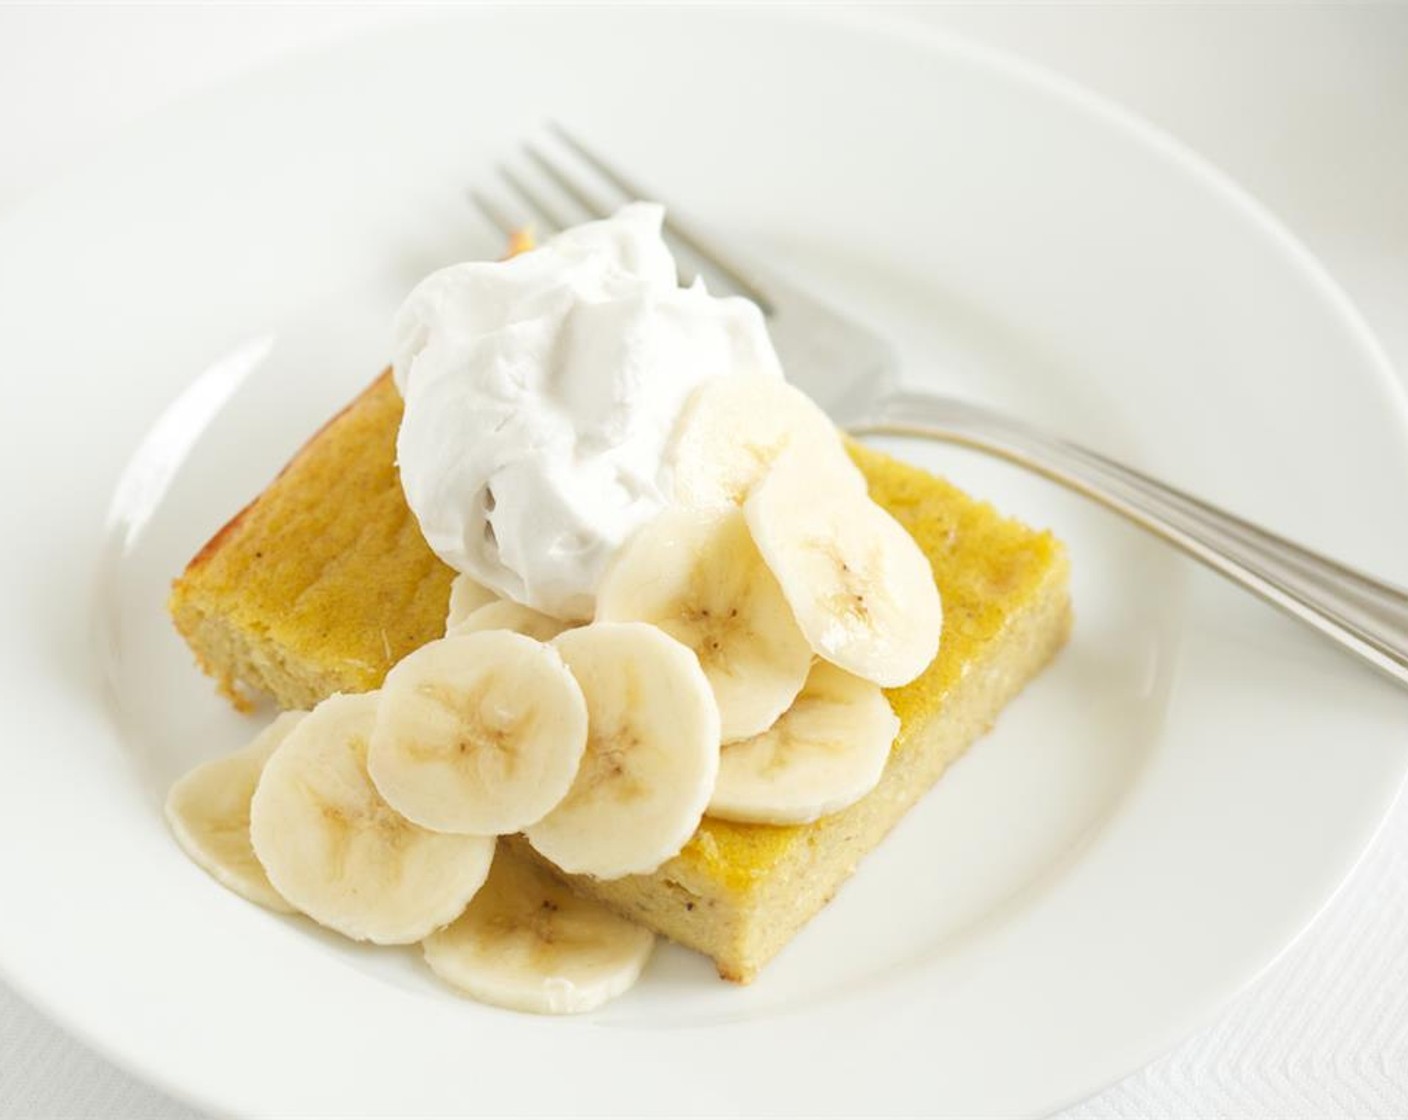 step 7 Serve the cake in slices with the coconut whipped cream and more slices of Bananas (to taste).